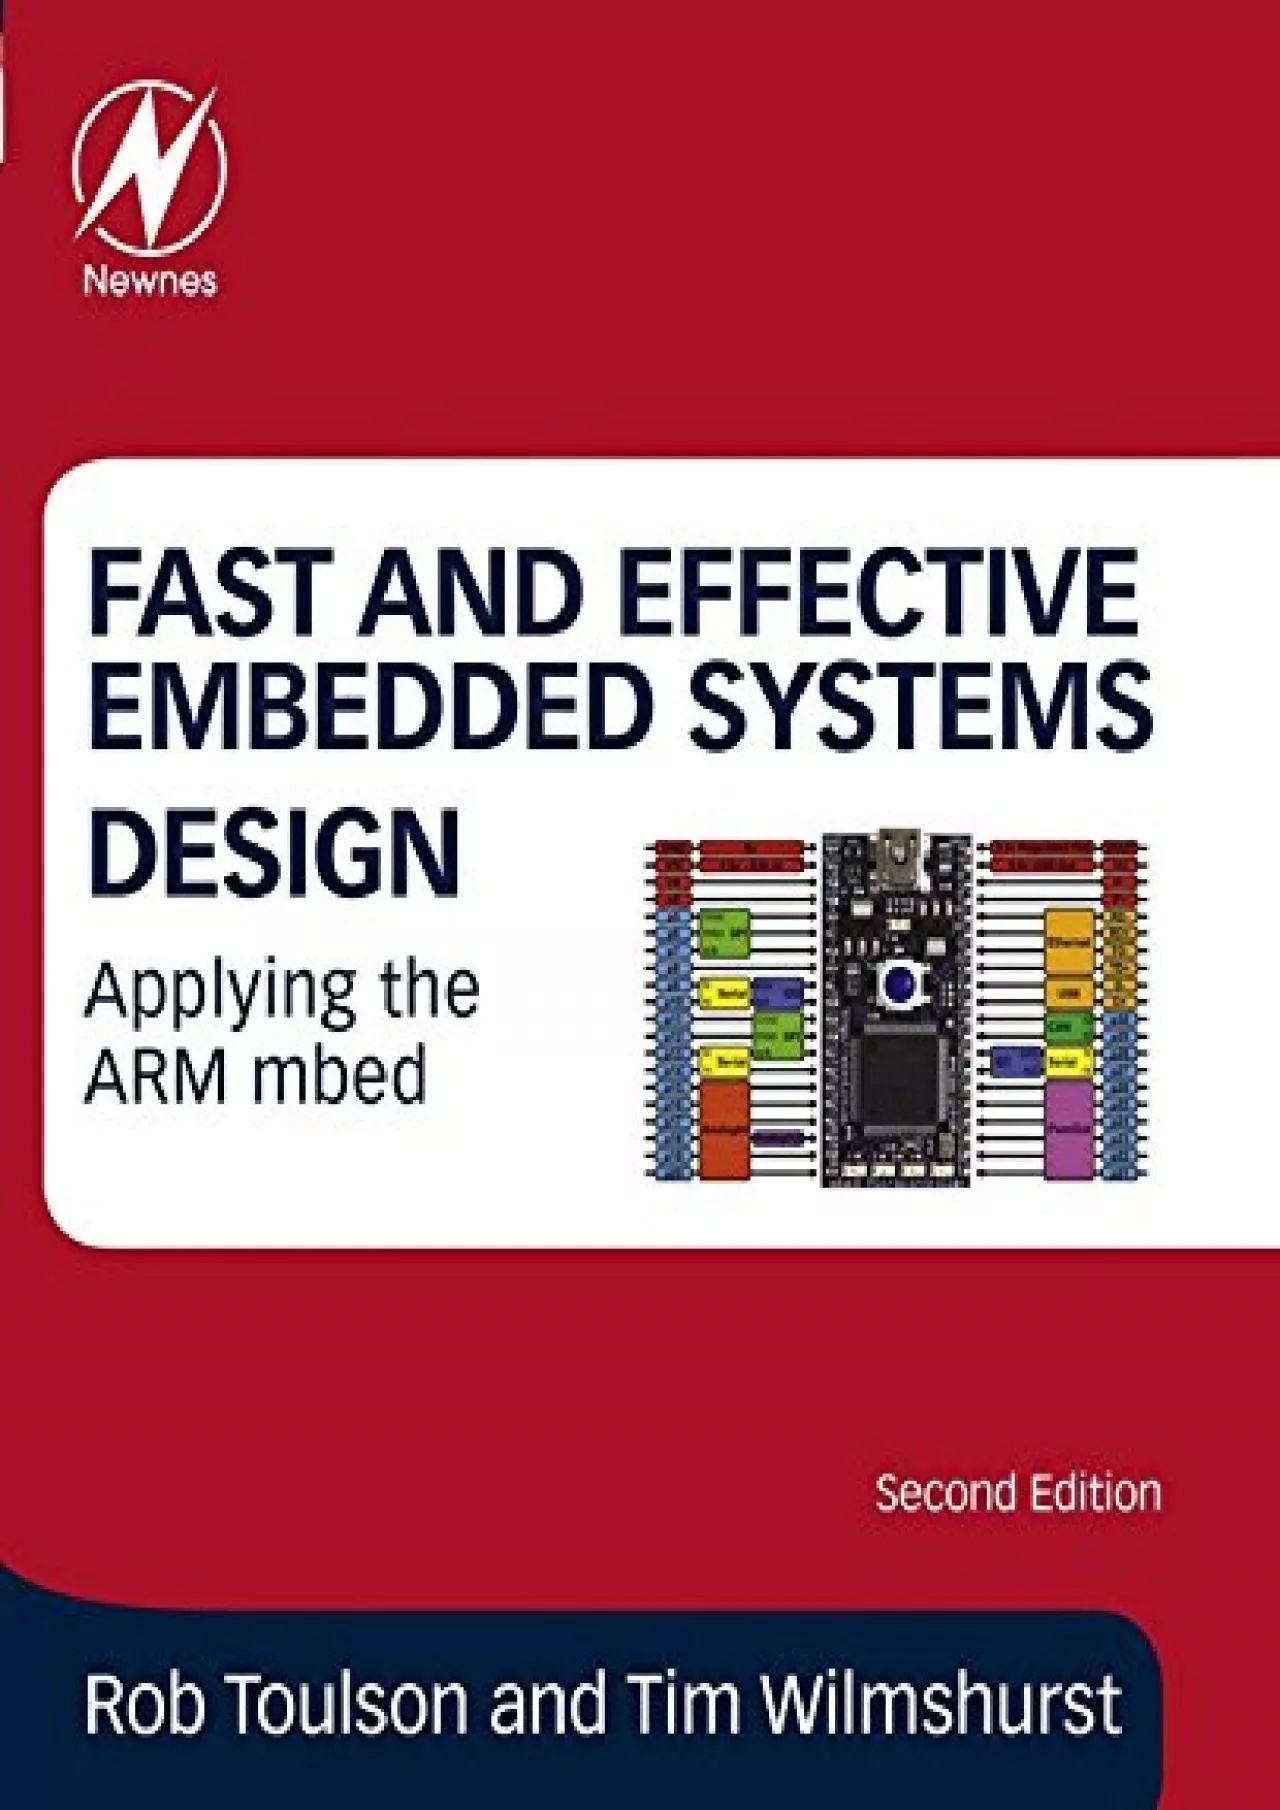 [eBOOK]-Fast and Effective Embedded Systems Design: Applying the ARM mbed